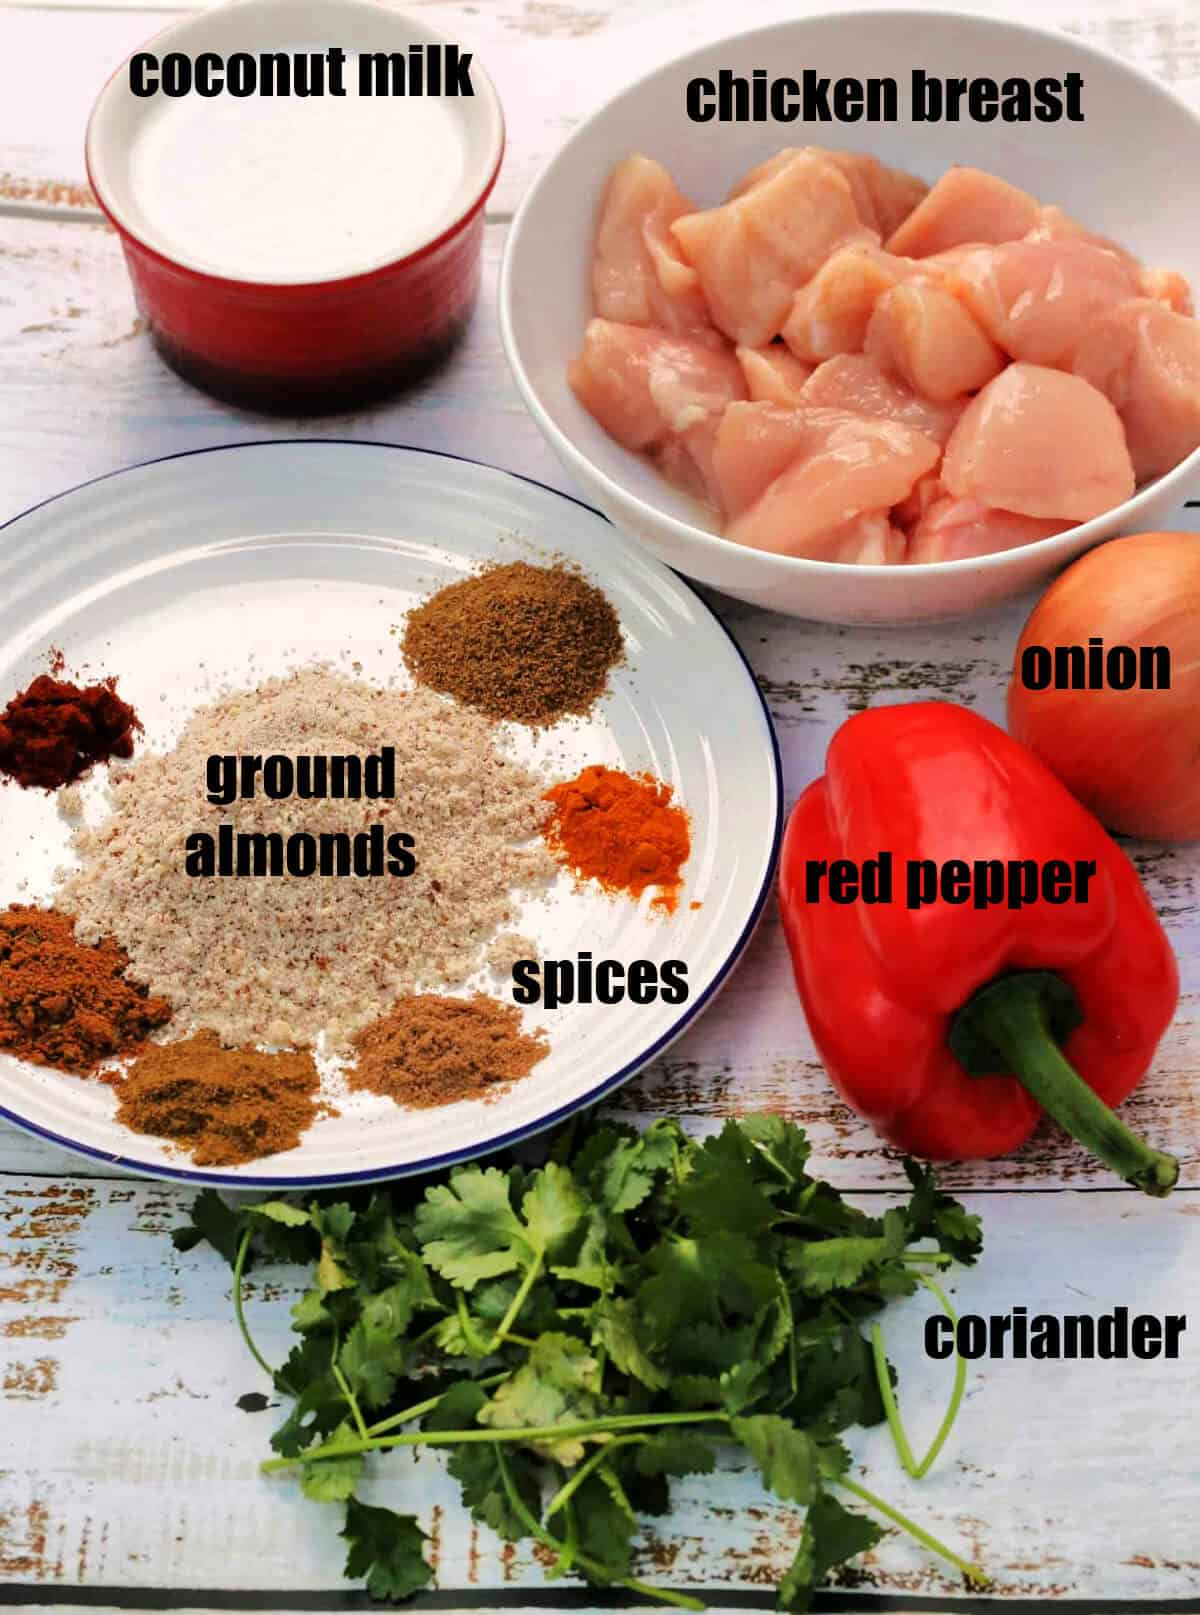 Ingredients for curry with labels.